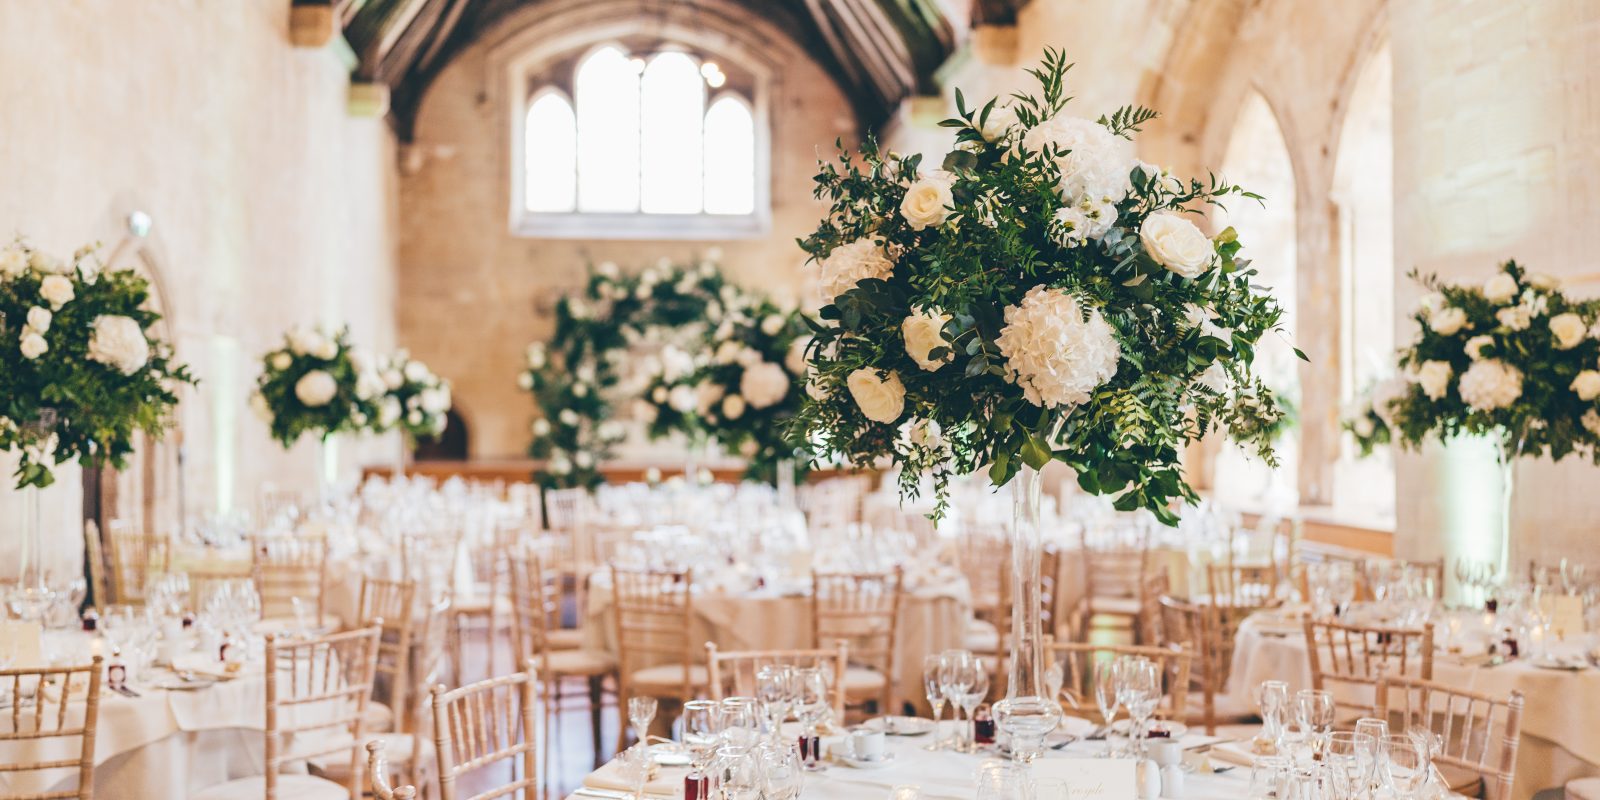 Bradenstoke Hall setup for a wedding breakfast with floral centre pieces